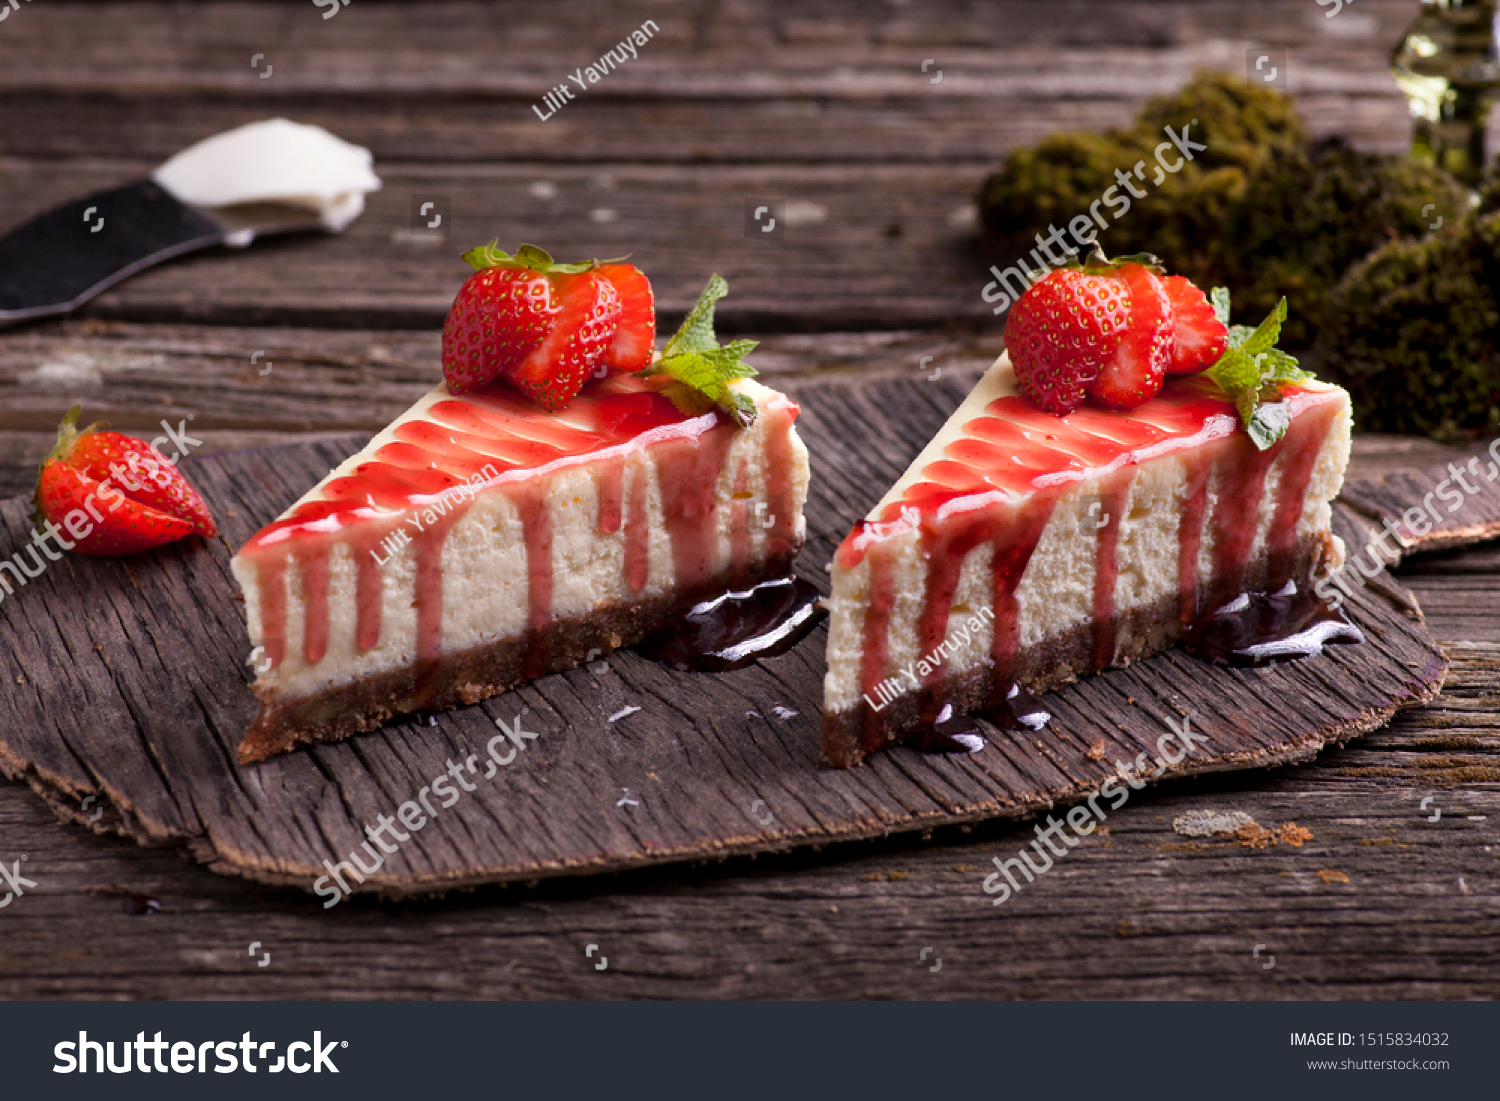 Strawberry cheesecake on wooden exposition  #1515834032